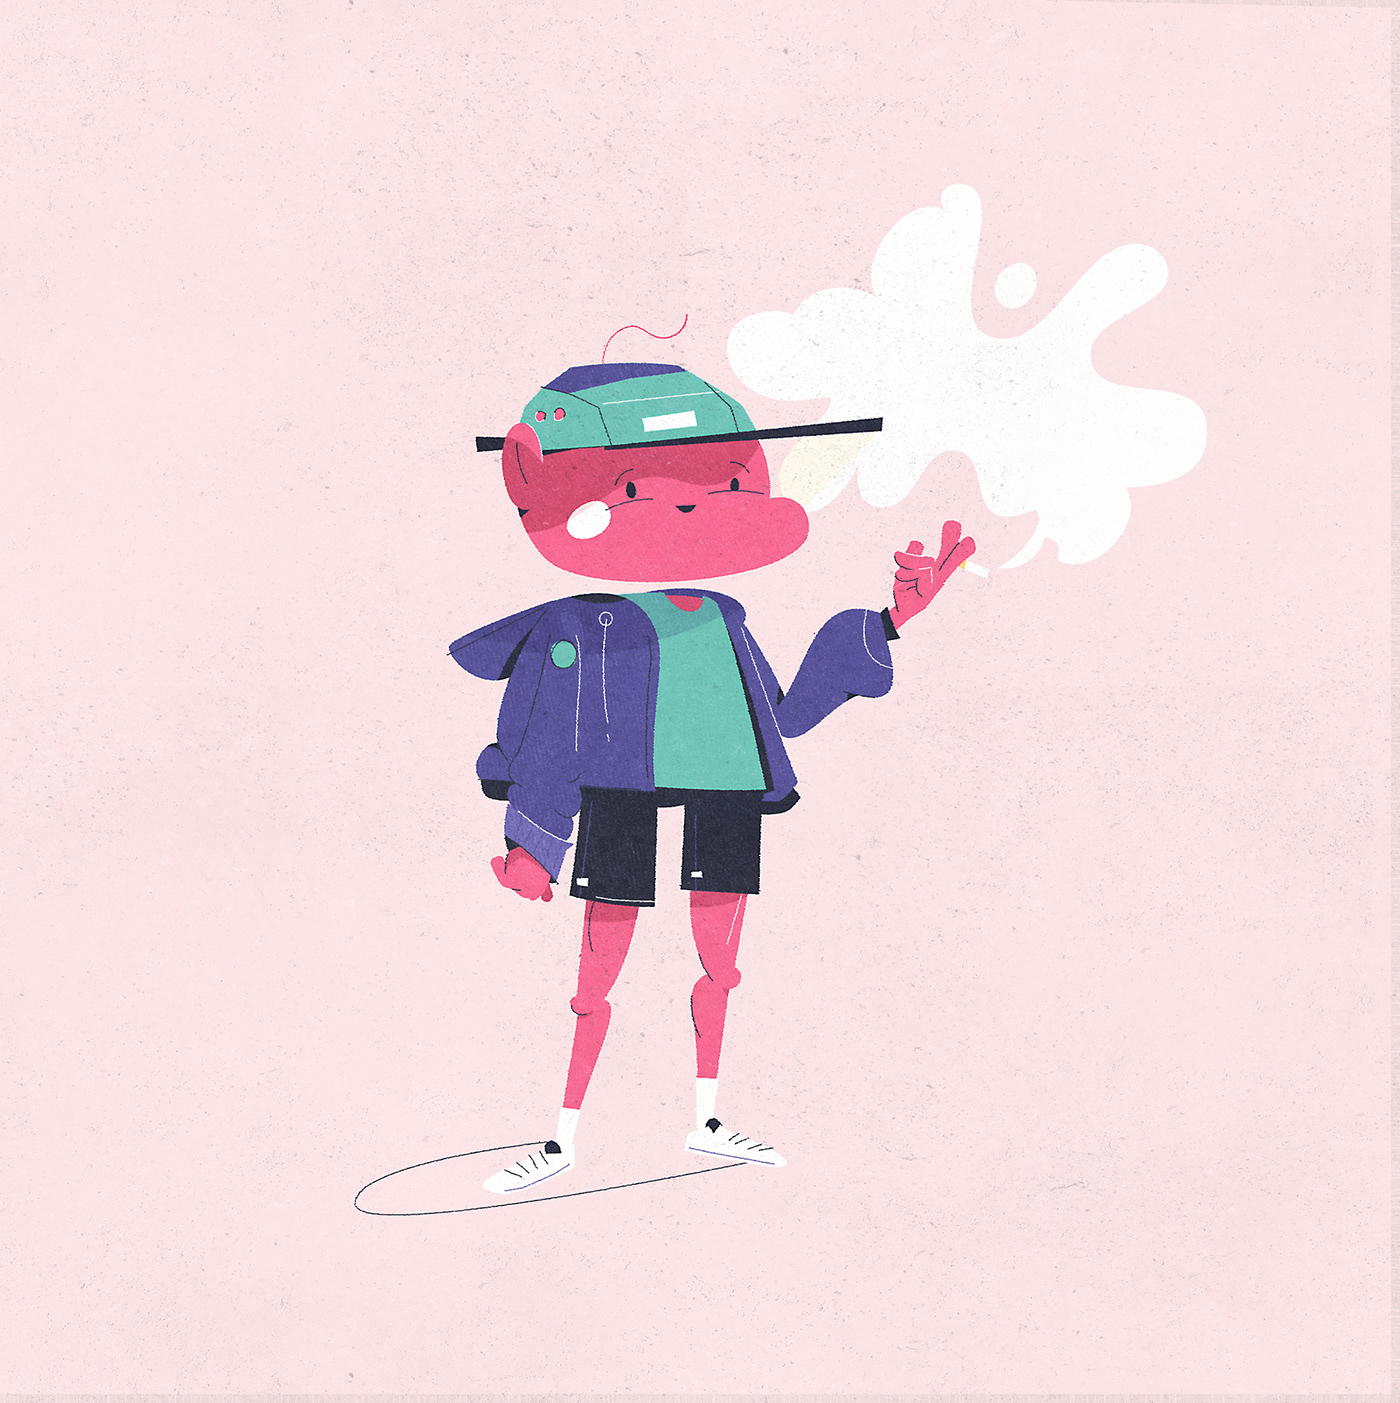 A small cute character with a purple sweatshirt smoking a cigarette.